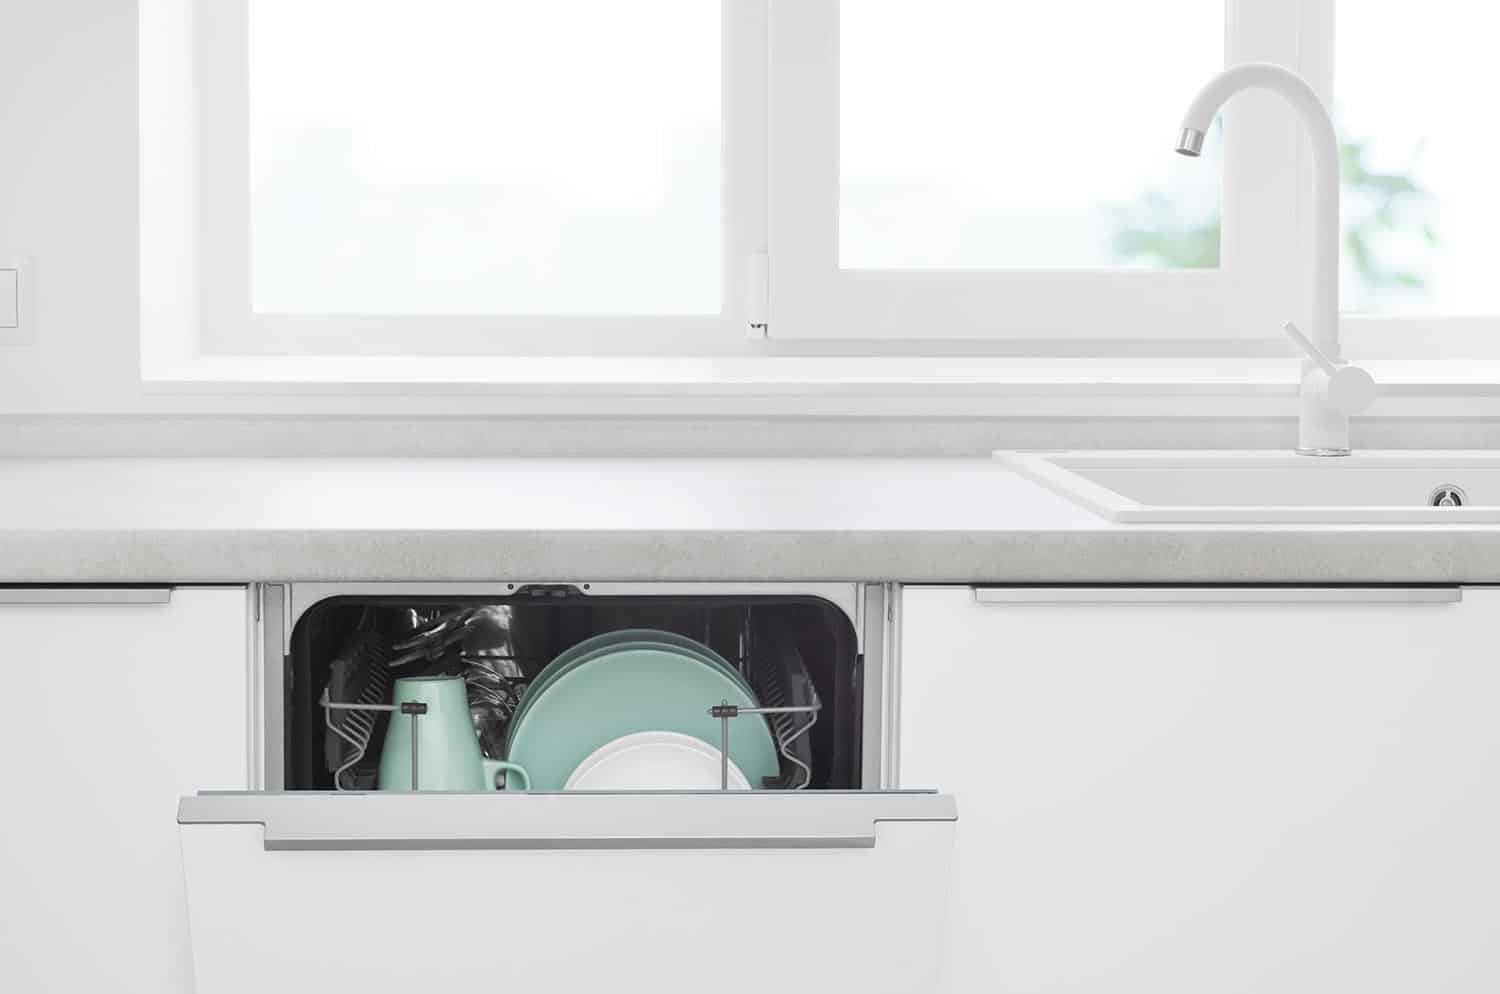 Opened door of build-in dishwasher on modern kitchen counter